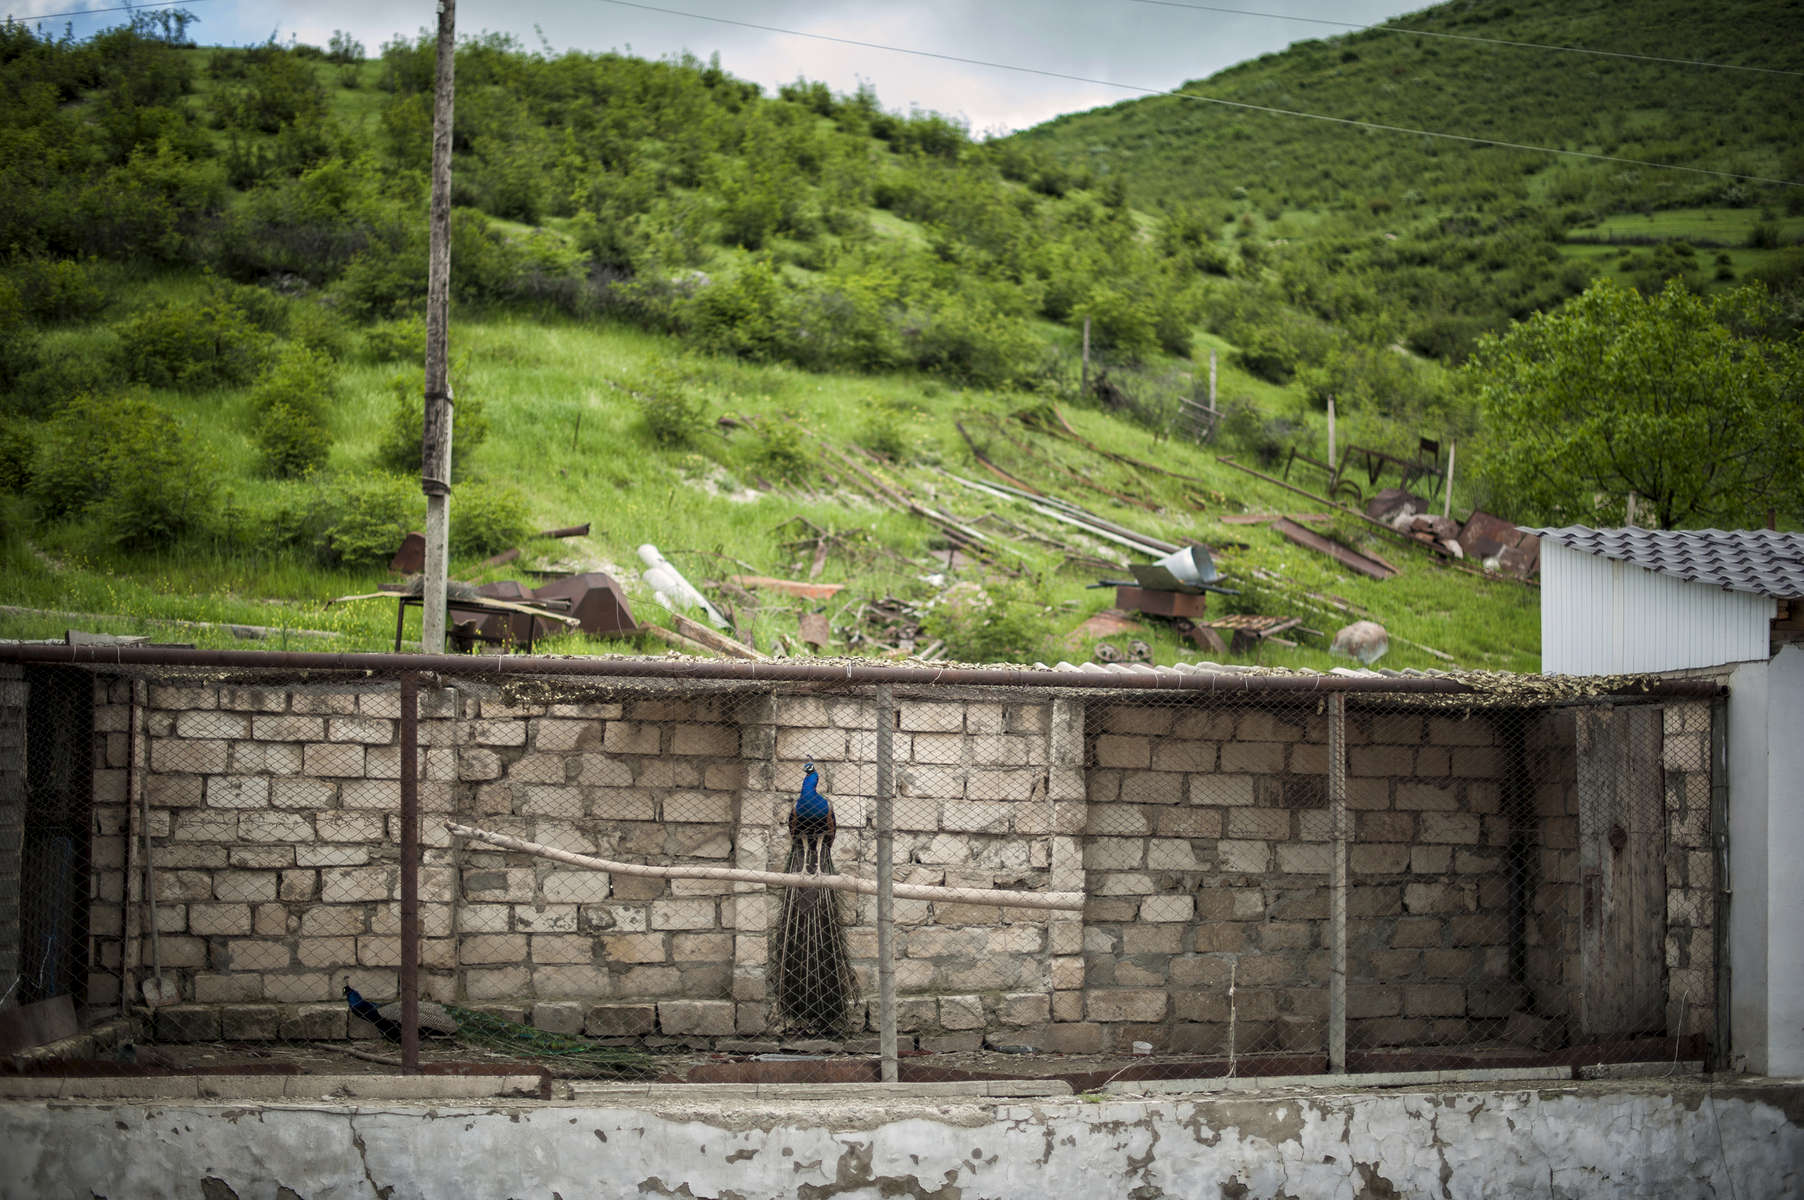 Visit to homes that have been struck by GRAD and LAR-160 rockets during the Four Day War in the village of Nerkin Horatagh in Martakert, Nagorno Karabakh. 